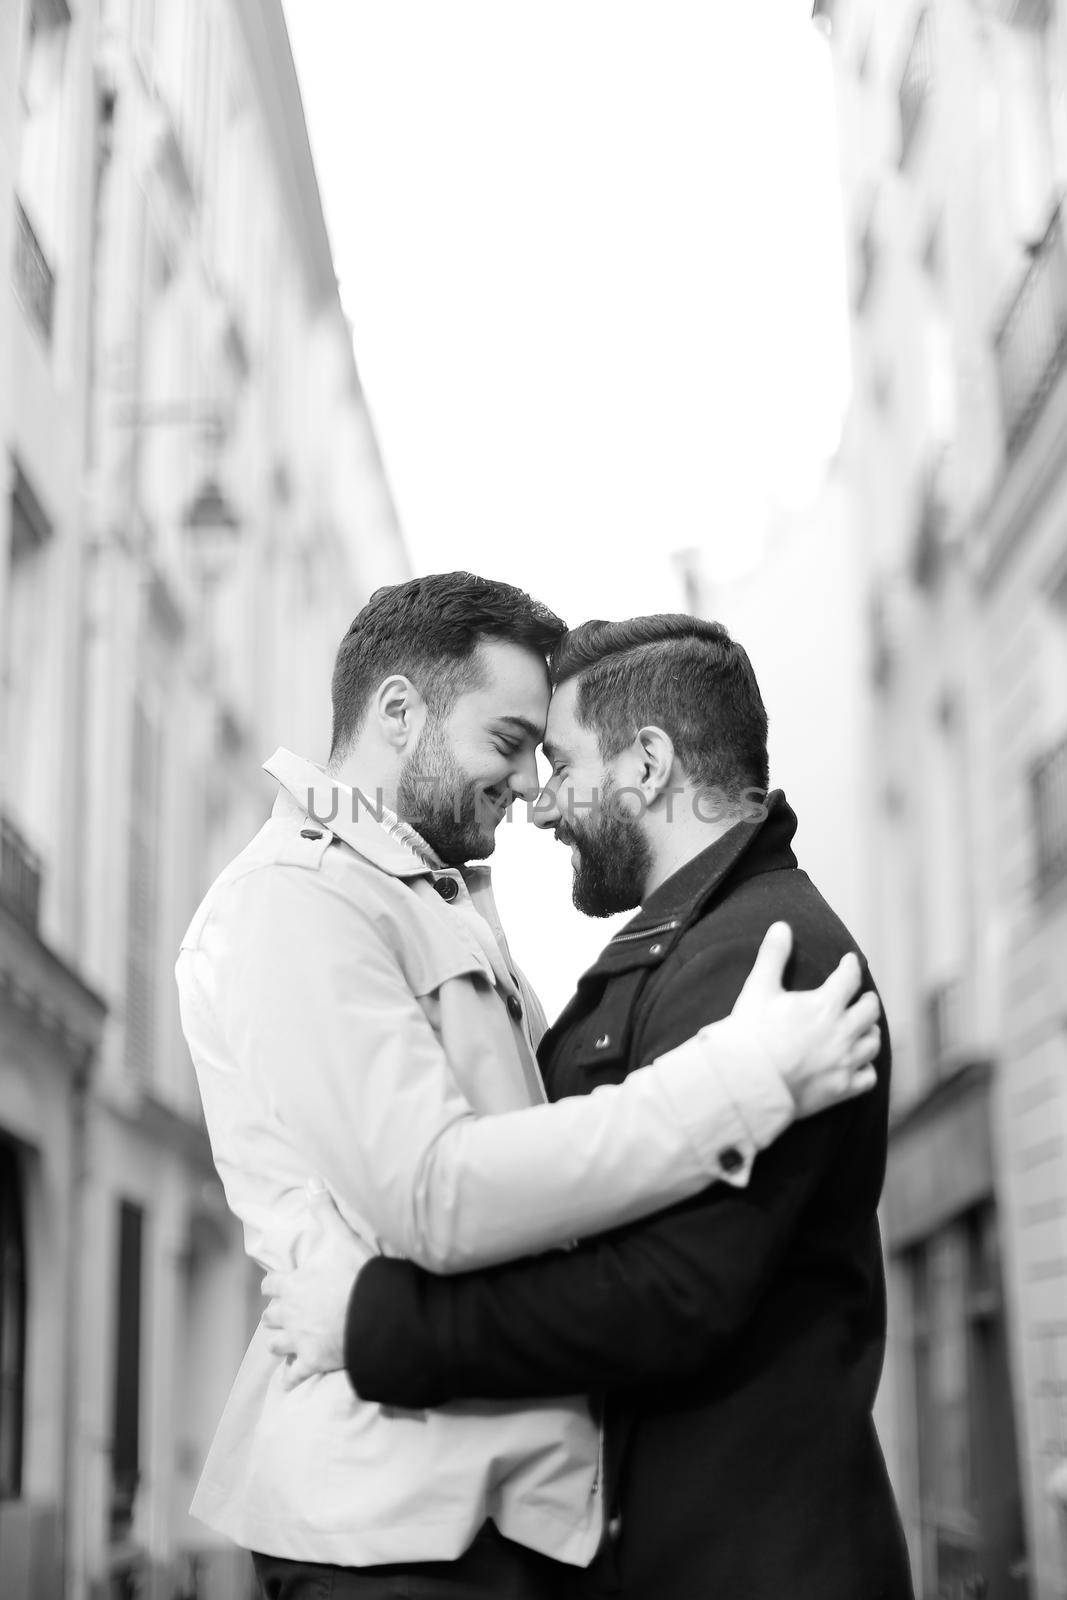 Black and white photo of two hugging gays in city, buildings i background. by sisterspro